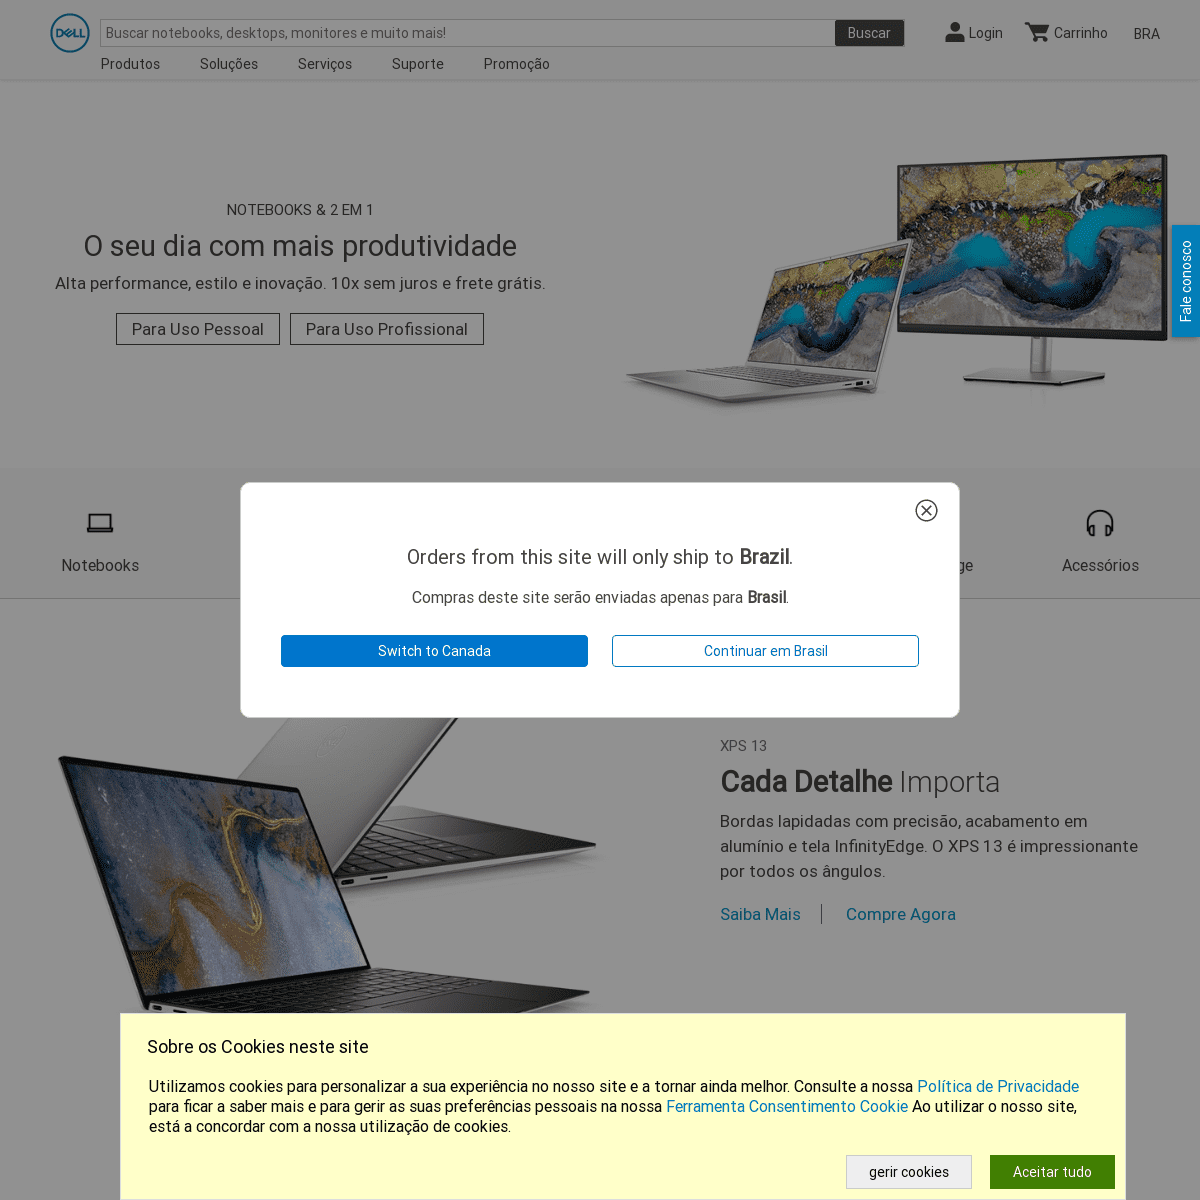 A complete backup of https://dell.com.br